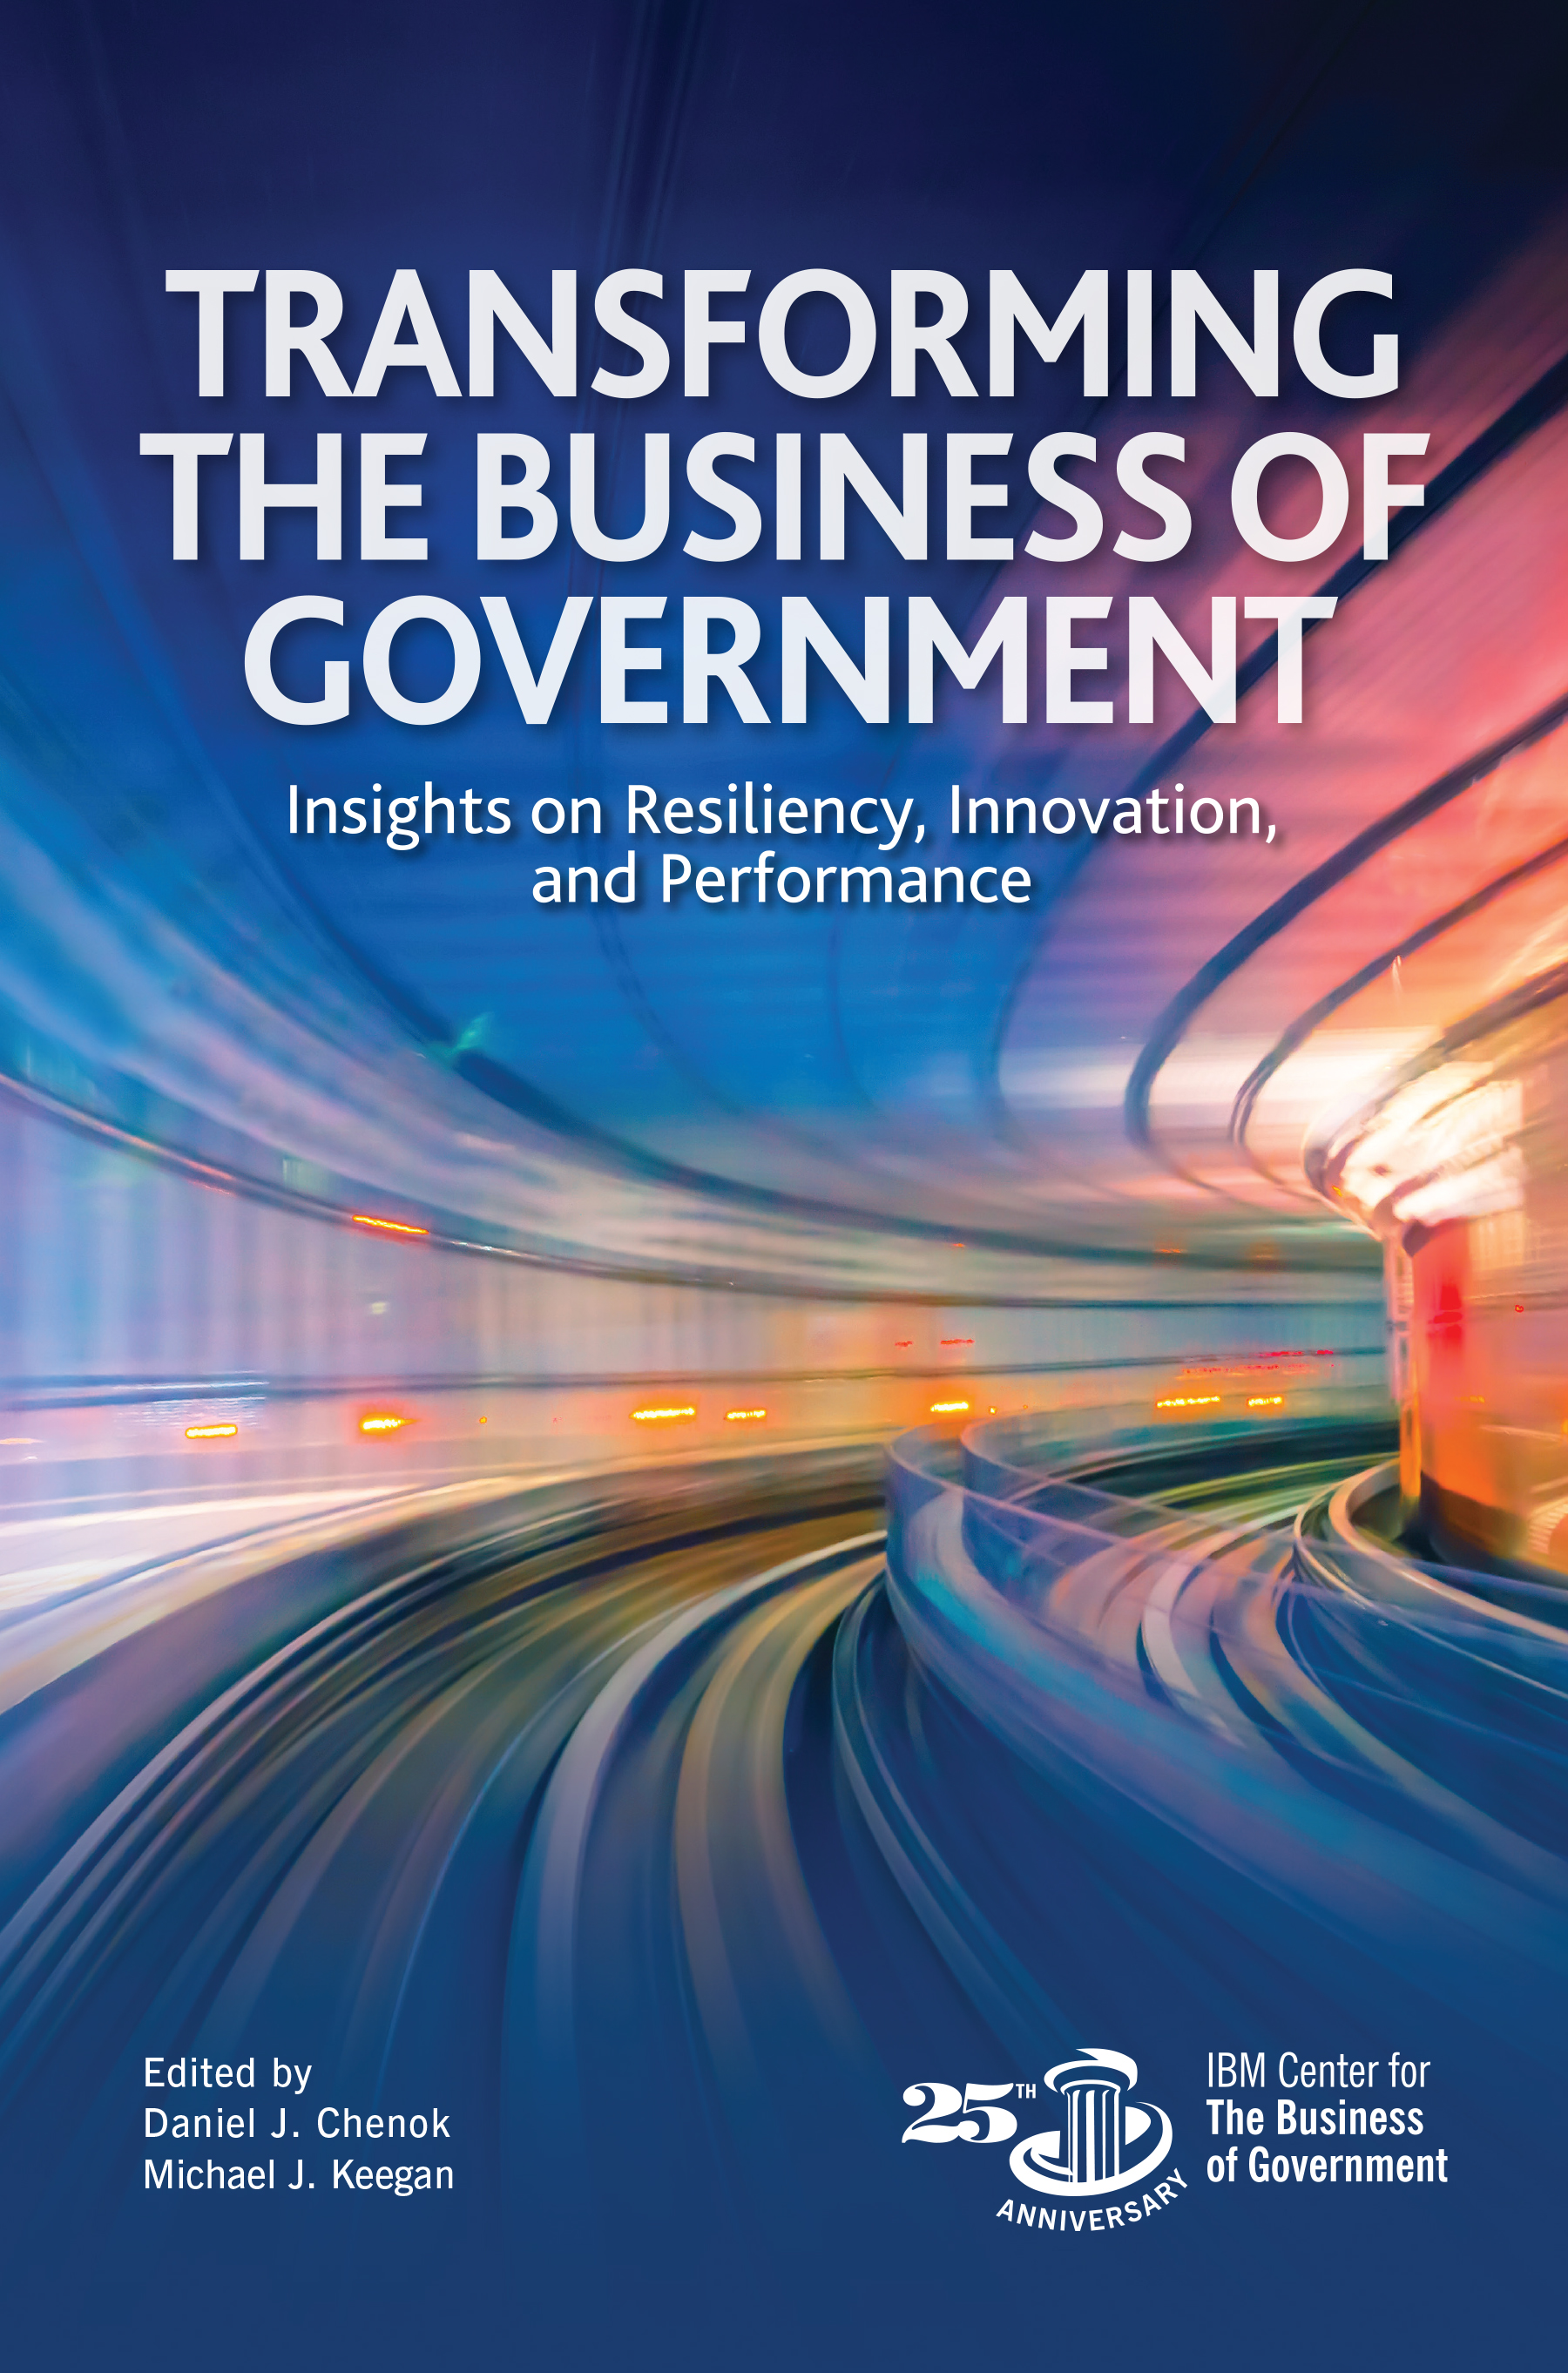 Transforming the Business of Government: Insights on Resiliency, Innovation, and Performance